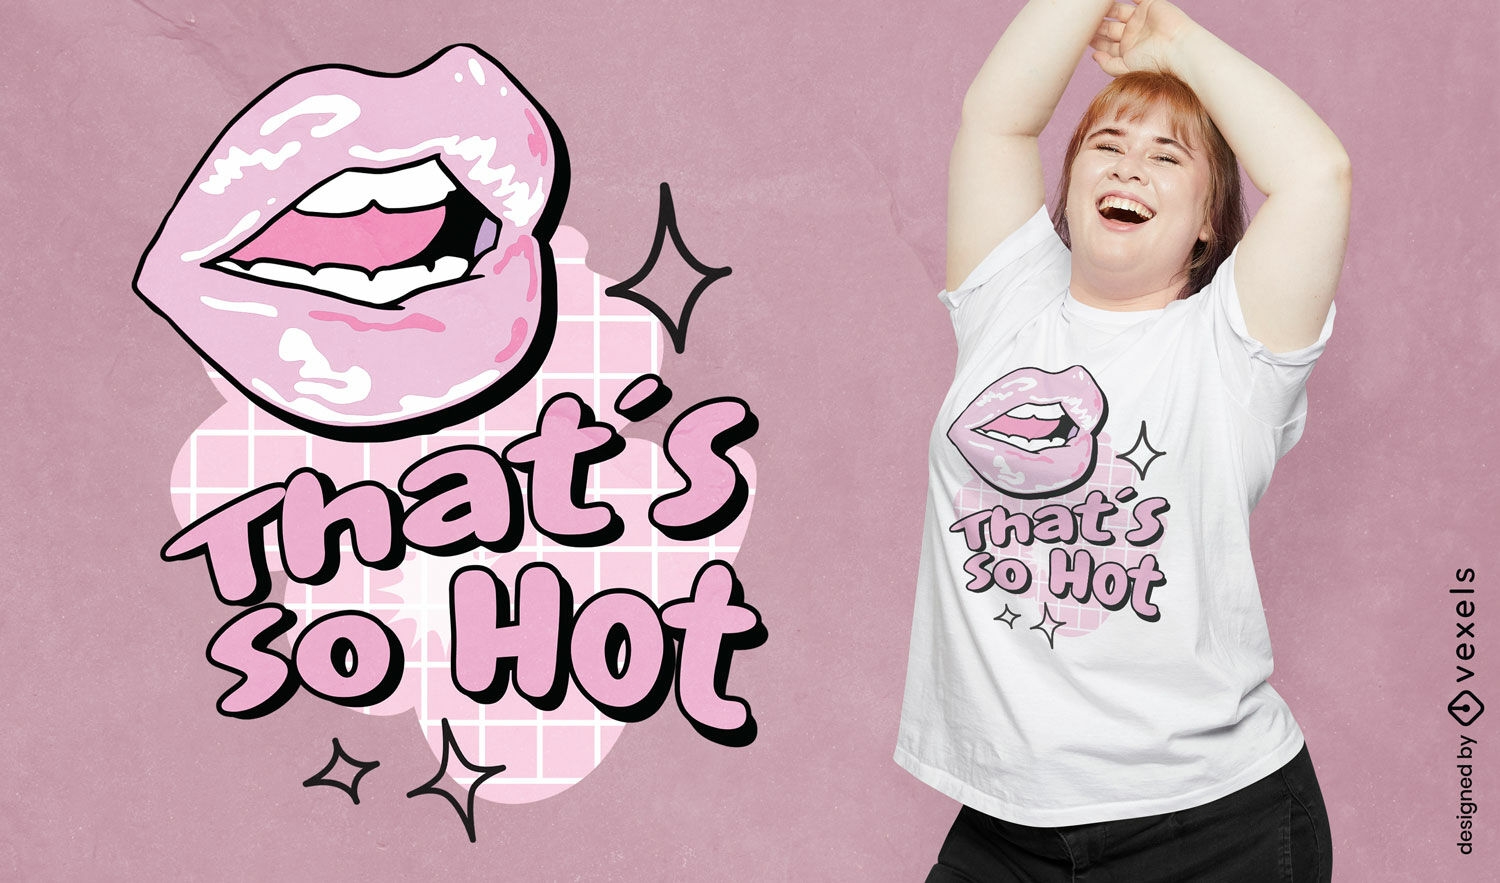 That's so hot glossy lips 2000s quote t-shirt design